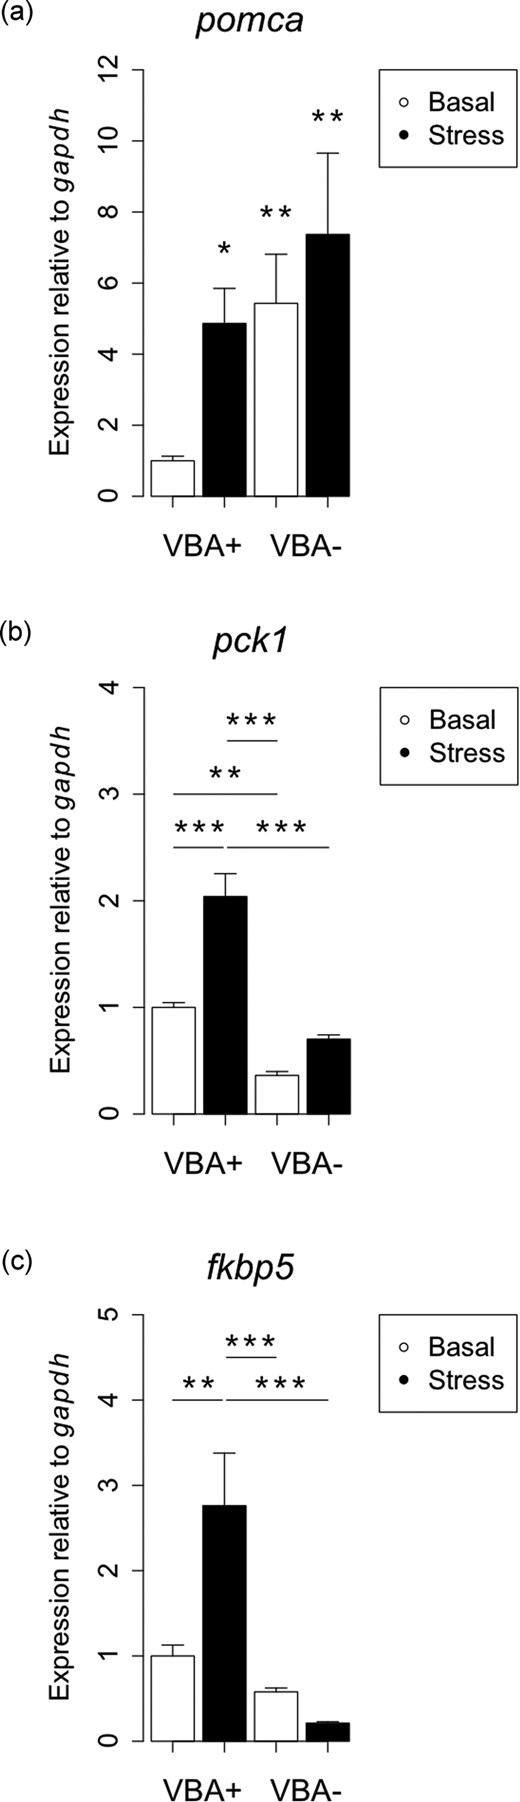 Zebrafish cyp21a2 mutants have a dysregulated HPI axis. Analysis of baseline and stress-induced transcript levels of pomca, fkbp5, pck1 in 120-hpf VBA+ (wild-type) vs. their VBA− (mutant) siblings by qPCR. Expression is relative to the control gene gapdh. (a) Expression of pomca is affected by VBA response (genotype) and stress treatment (two-way ANOVA: VBA/stress interaction F = 4.15, df = 1,20, P = 0.05). Expression increases in VBA+ larvae in response to stress (*P = 0.01), and expression in VBA− larvae under control (**P = 0.007) and stressed (**P = 0.002) conditions is higher than VBA+ baseline levels. Analysis carried out on log-transformed data; untransformed data are plotted. n = 6 each. (b) Expression of pck1 is affected by VBA response and stress treatment (two-way ANOVA: VBA/stress interaction F = 9.59, df = 1,16, **P = 0.006). Expression is lower in VBA− larvae than in VBA+ larvae under baseline (***P = 0.005) and stressed (***P < 0.0001) conditions. Expression increases in VBA+ larvae in response to stress (***P < 0.0001), but stress has no effect on expression levels in VBA− larvae (P = 0.18). n = 5 each. (c) Expression of fkbp5 is affected by VBA response and stress treatment (two-way ANOVA: VBA/stress interaction F = 11.38, df = 1,16, ***P = 0.003). Expression in VBA+ larvae increases in response to stress (**P = 0.005), but stress has no effect on VBA− expression levels (P = 0.84). Expression of fkbp5 in VBA+ larvae under stress was significantly lower in VBA− than in VBA+ larvae (***P = 0.0001). n = 5 each.